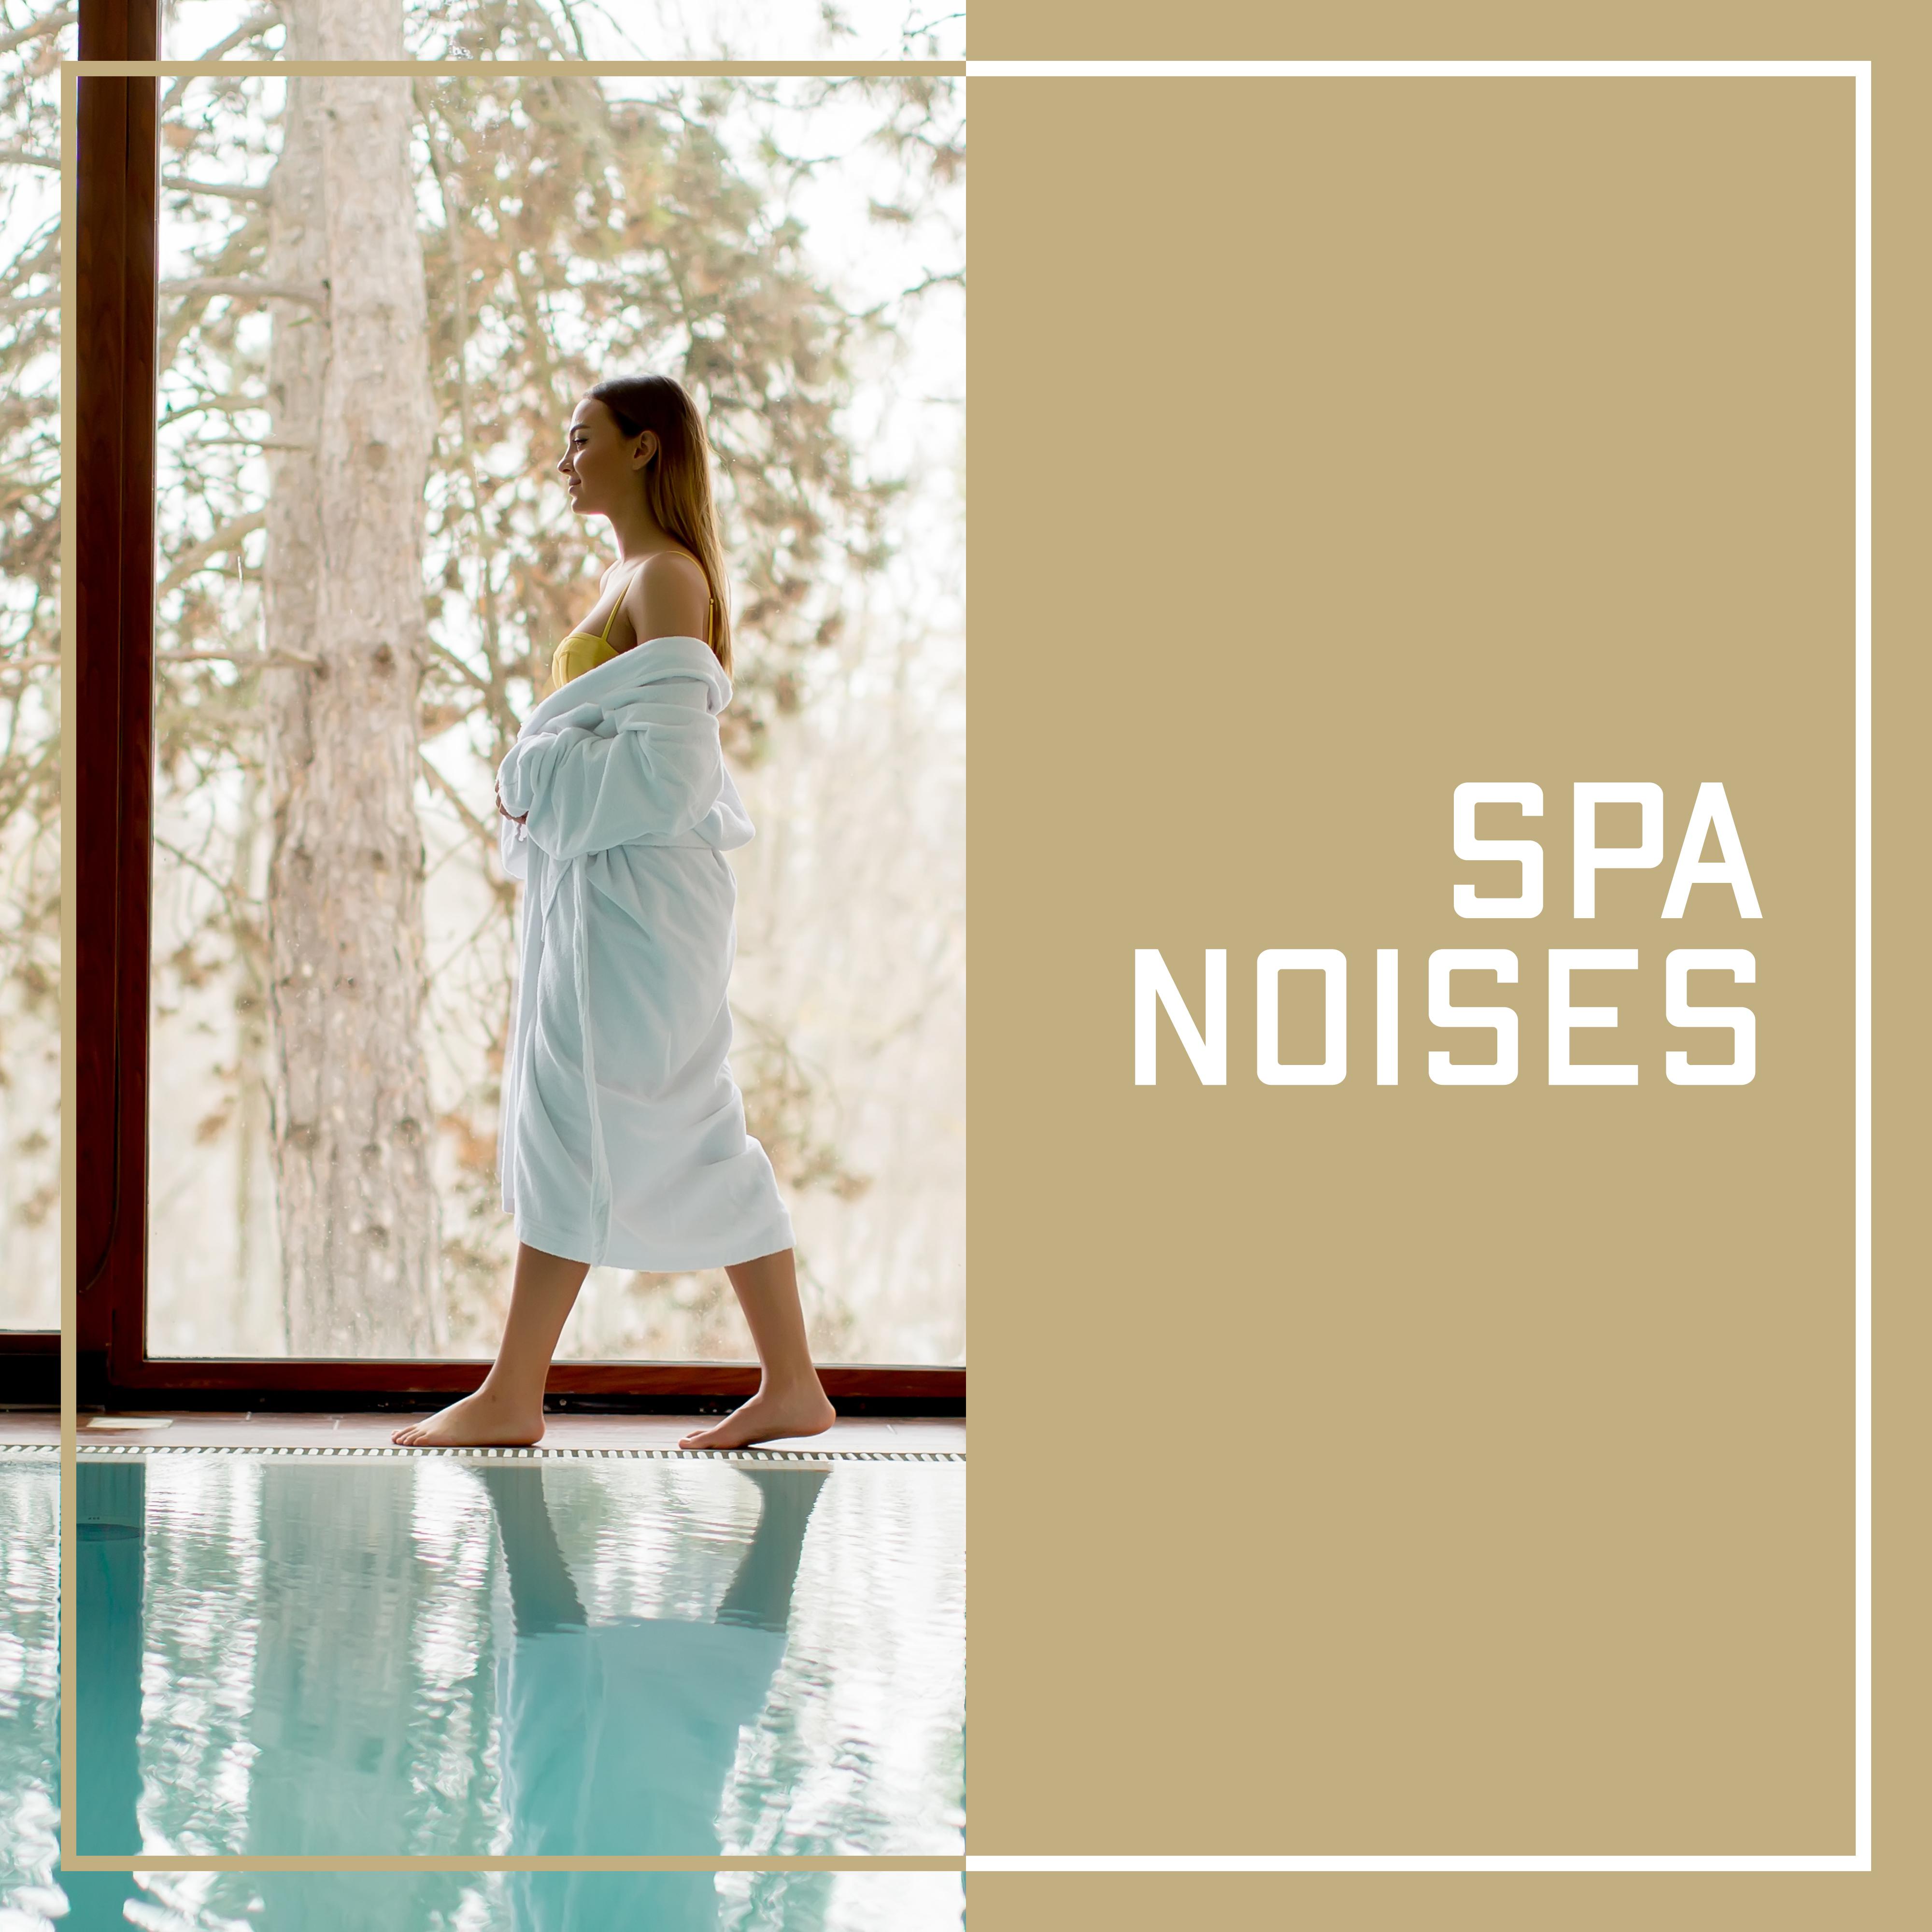 SPA Noises – Relaxing Sounds for Spa, Wellness, Massage, Deep Harmony, Pure Relaxation, Relaxing Music Therapy, Zen Spa